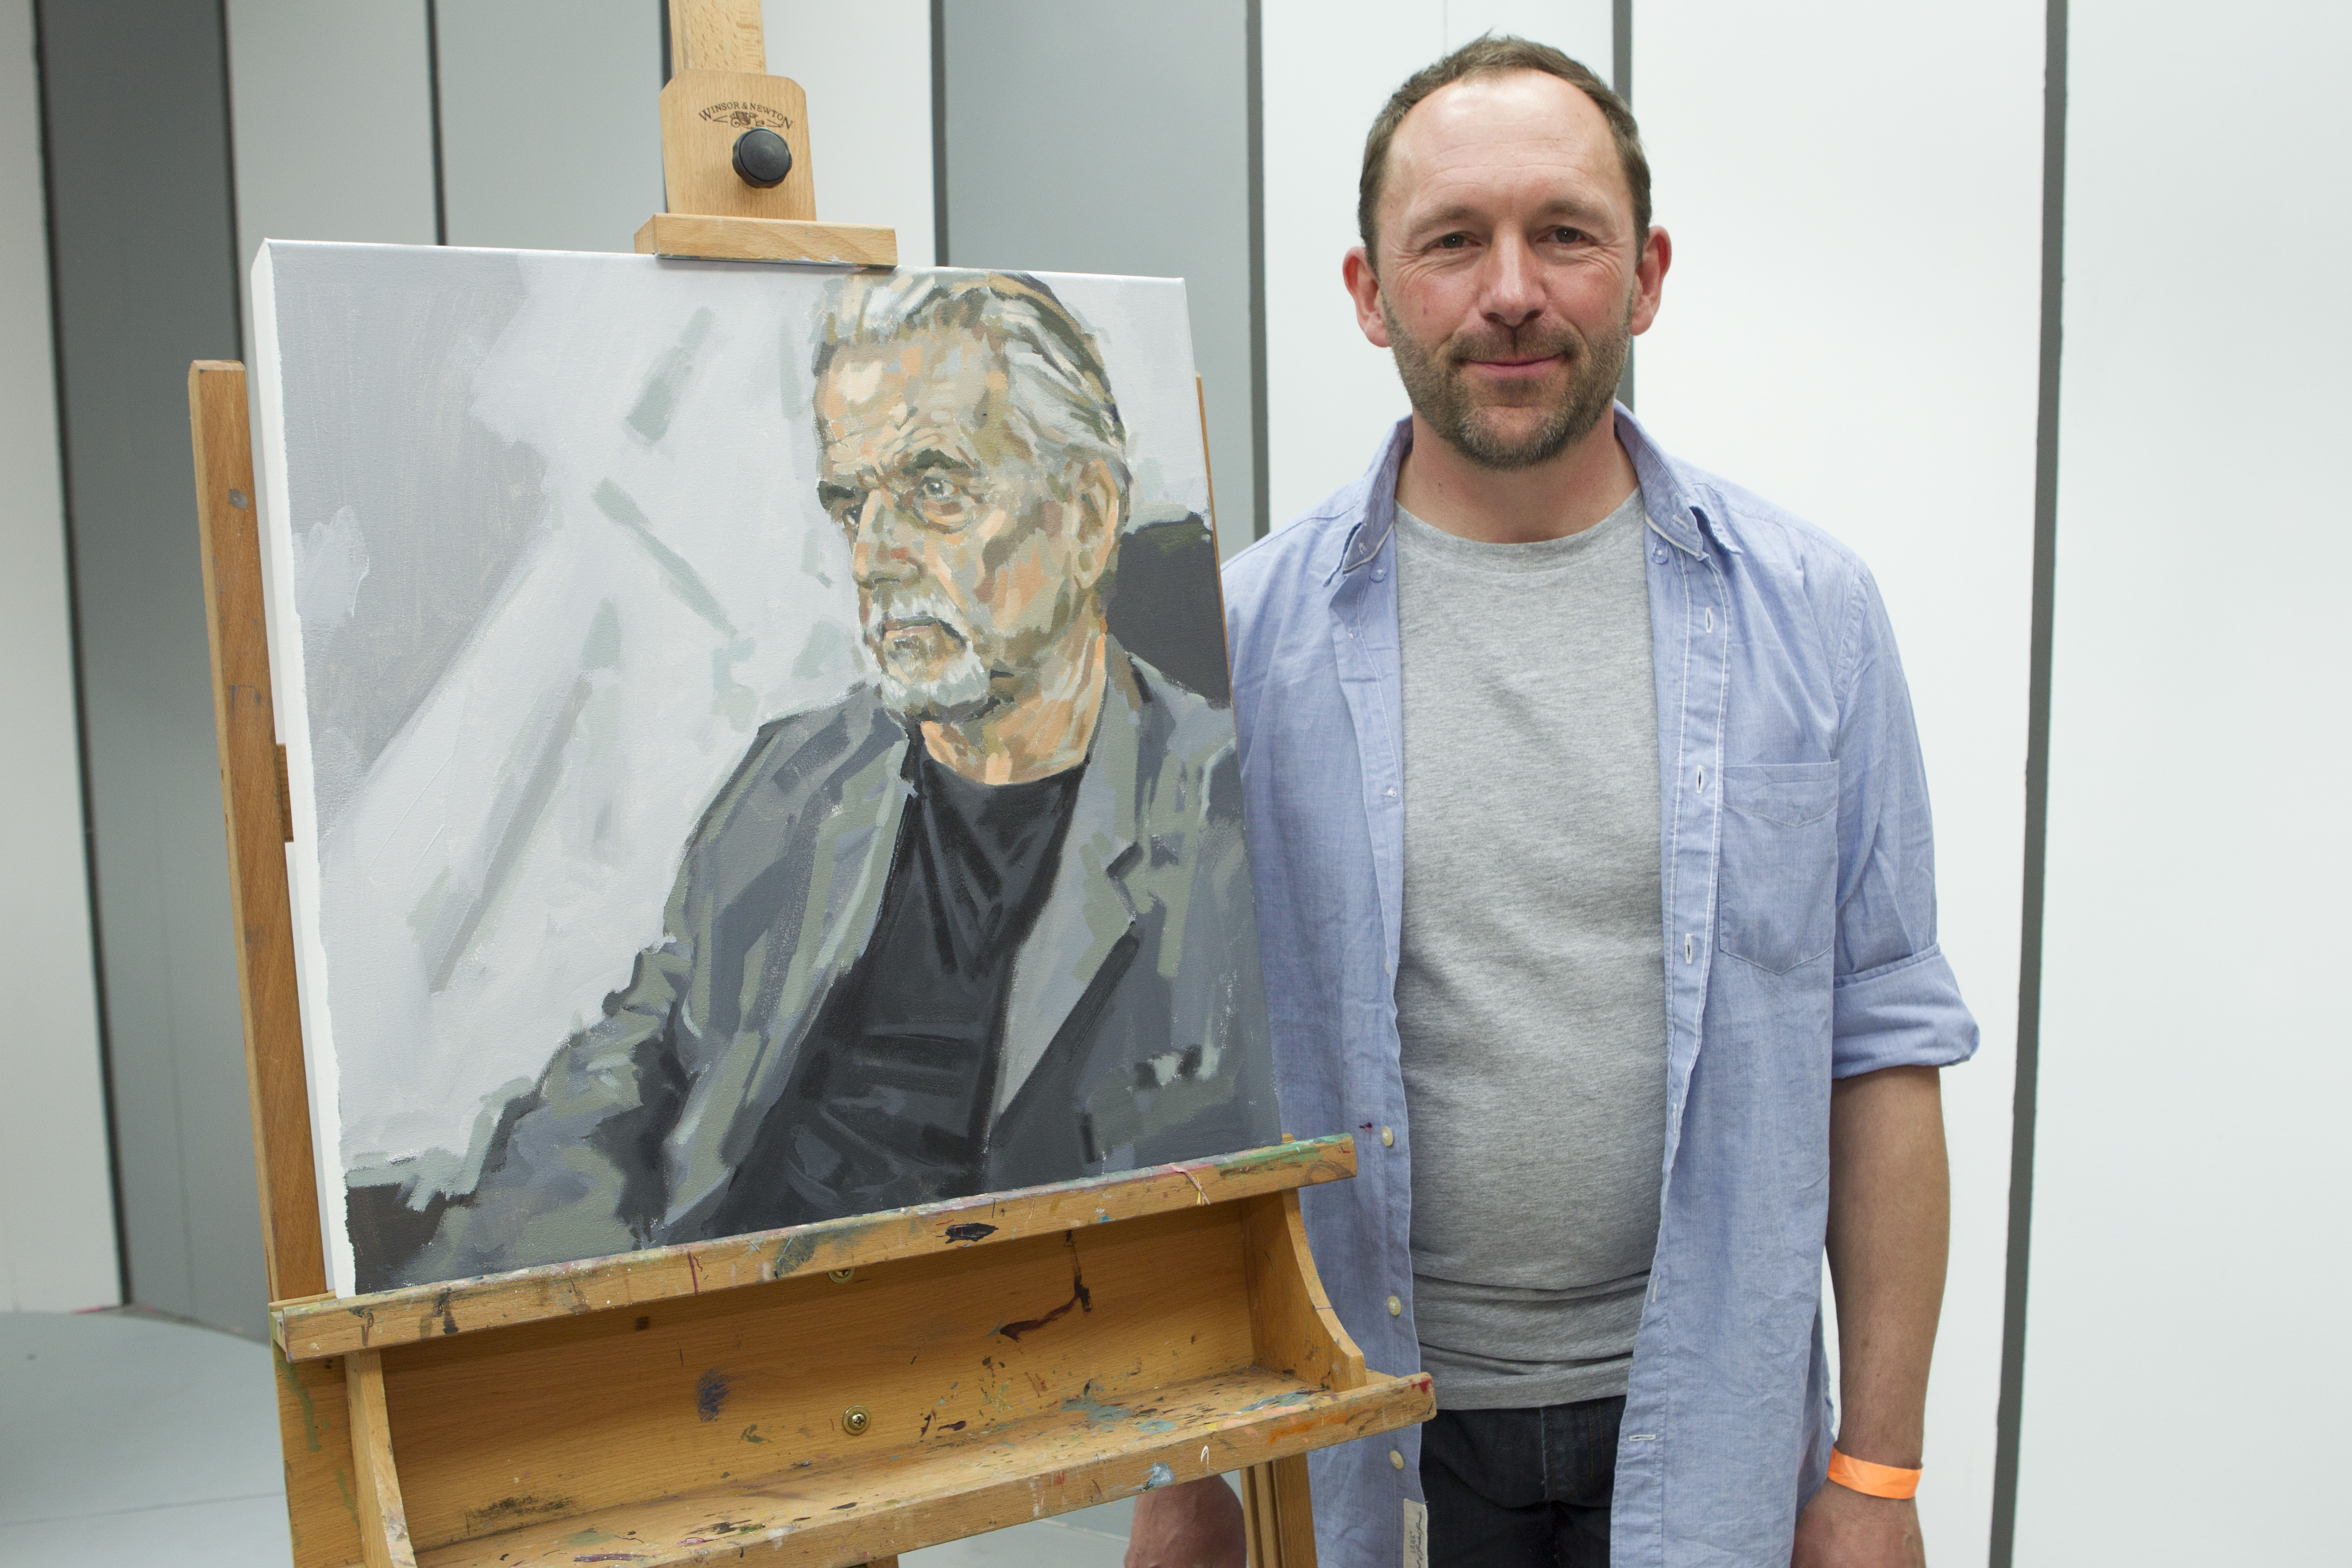 Exeter artist through to final six in Sky Arts’ Portrait Artist of the